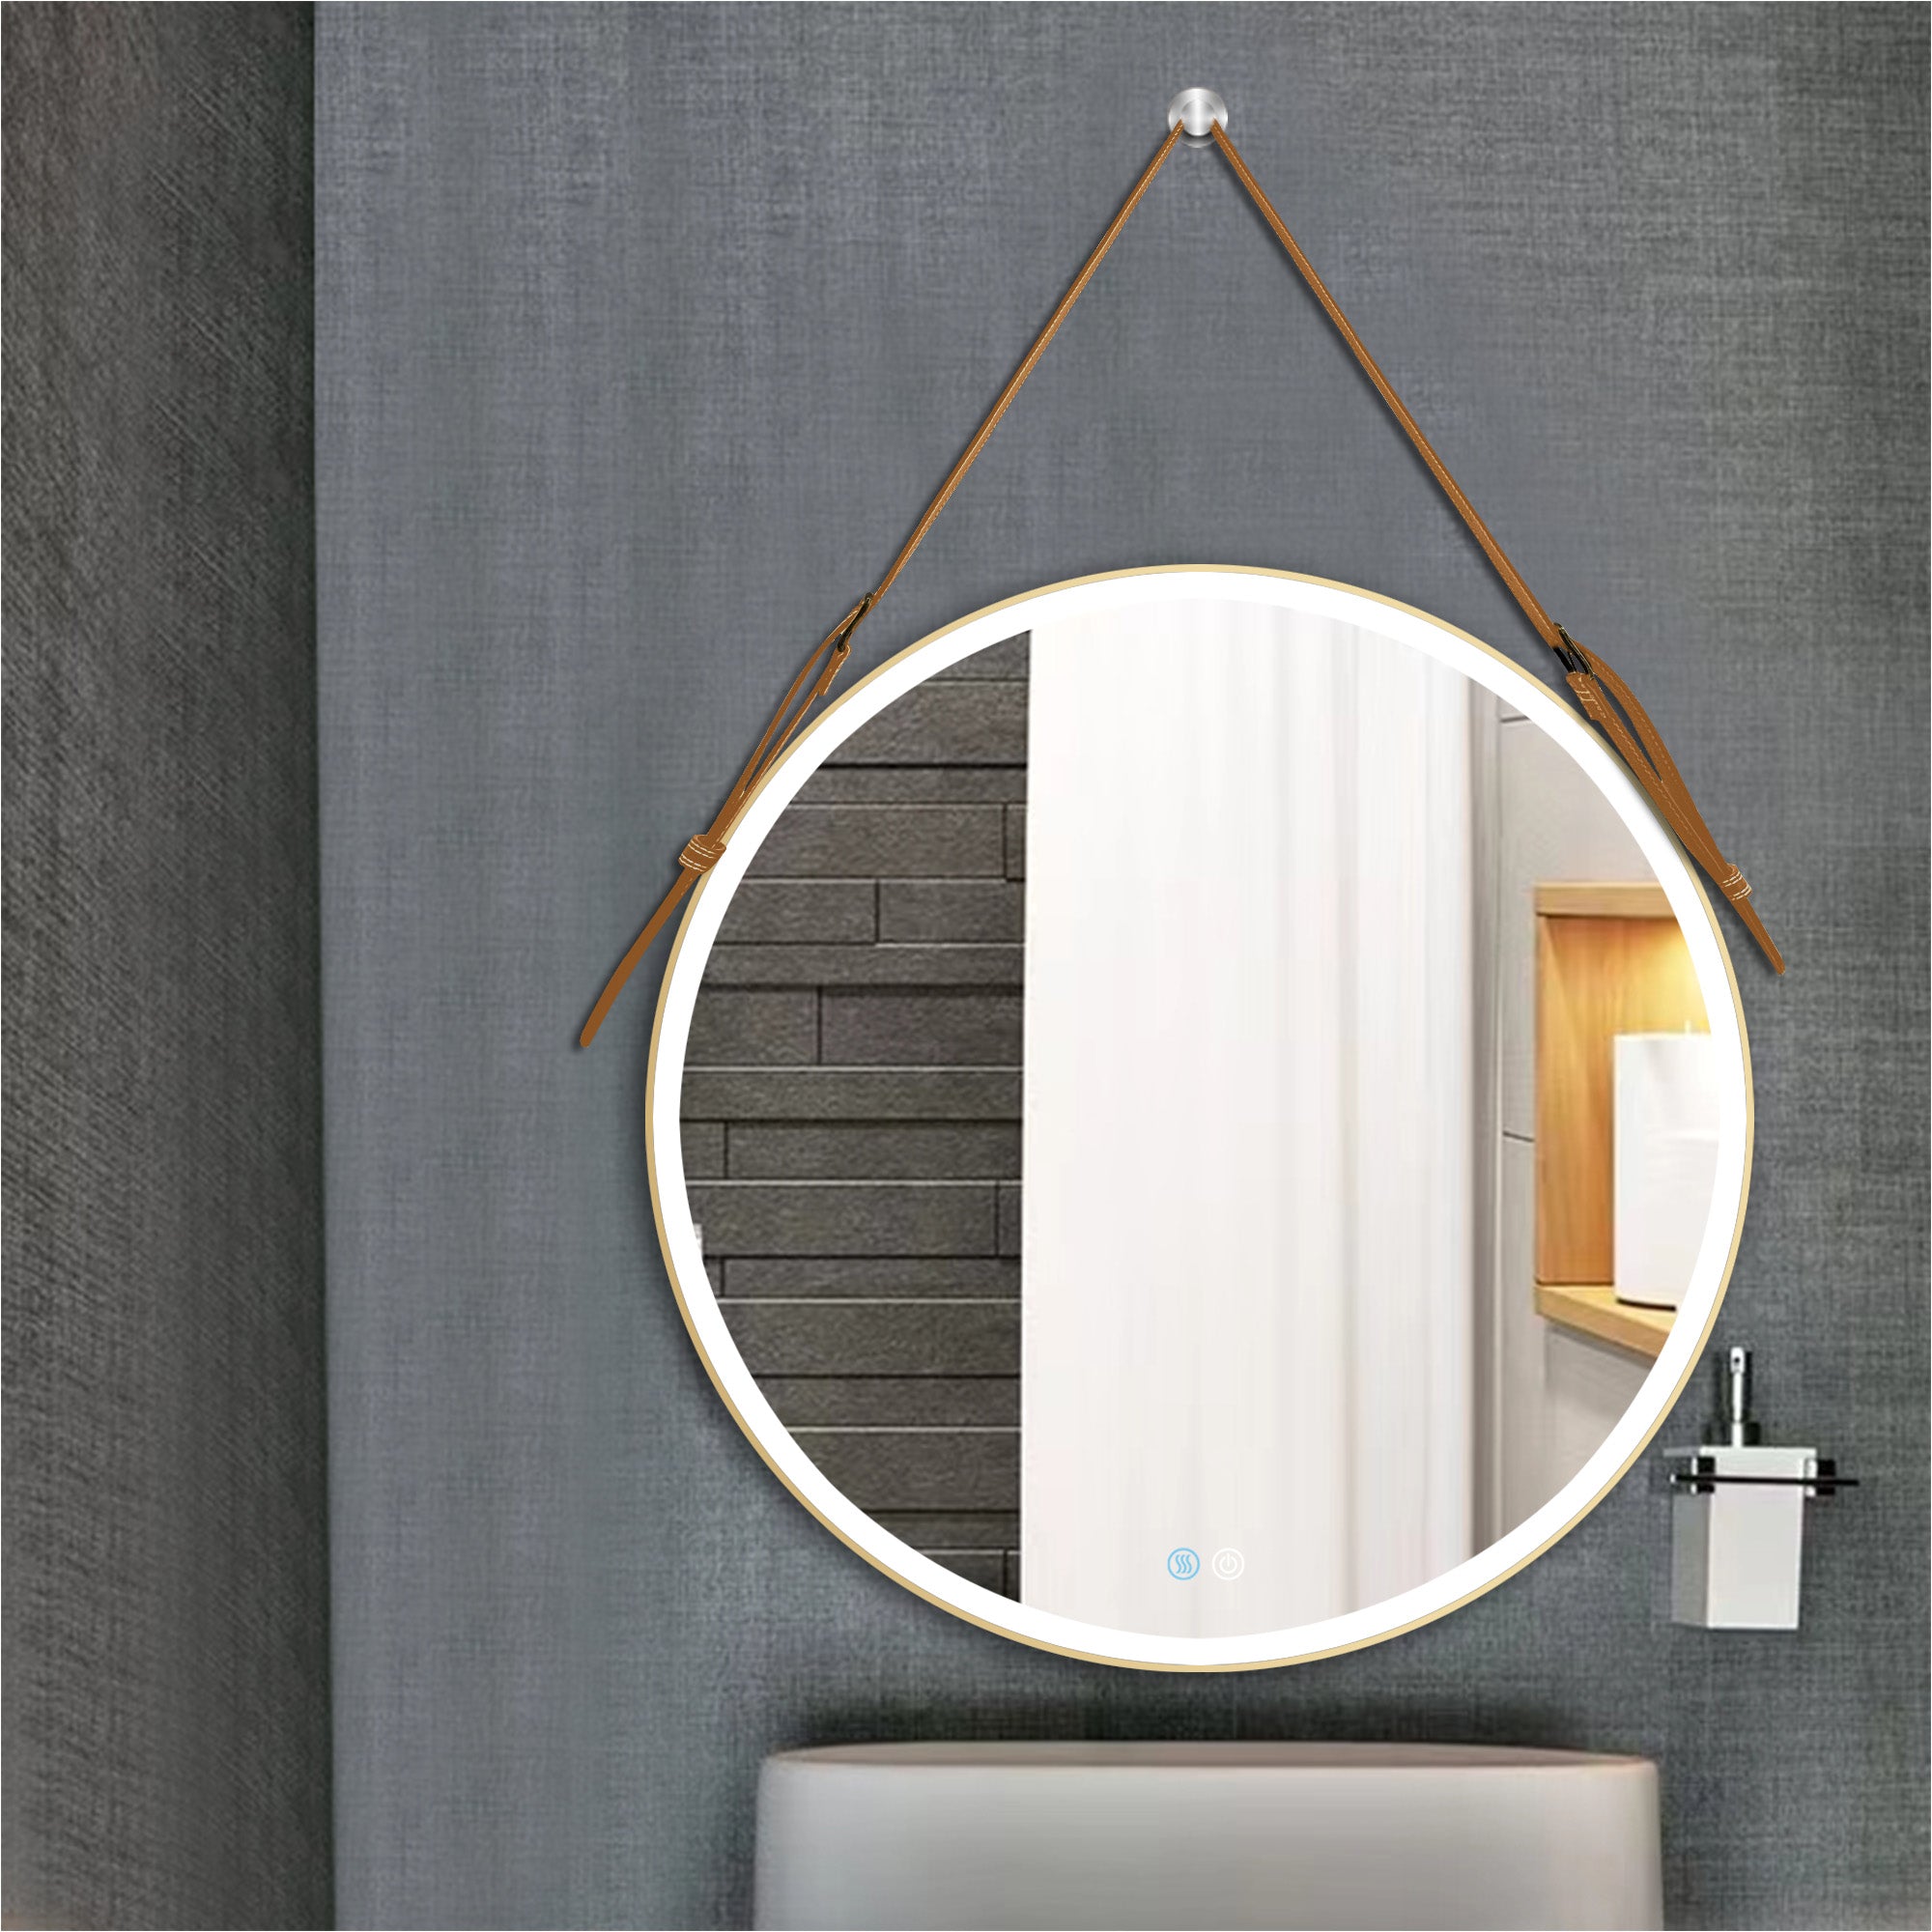 ZNTS Bathroom LED Mirror 32 Inch Round Mirror with Lights Smart 3 Lights Dimmable Illuminated W99577074